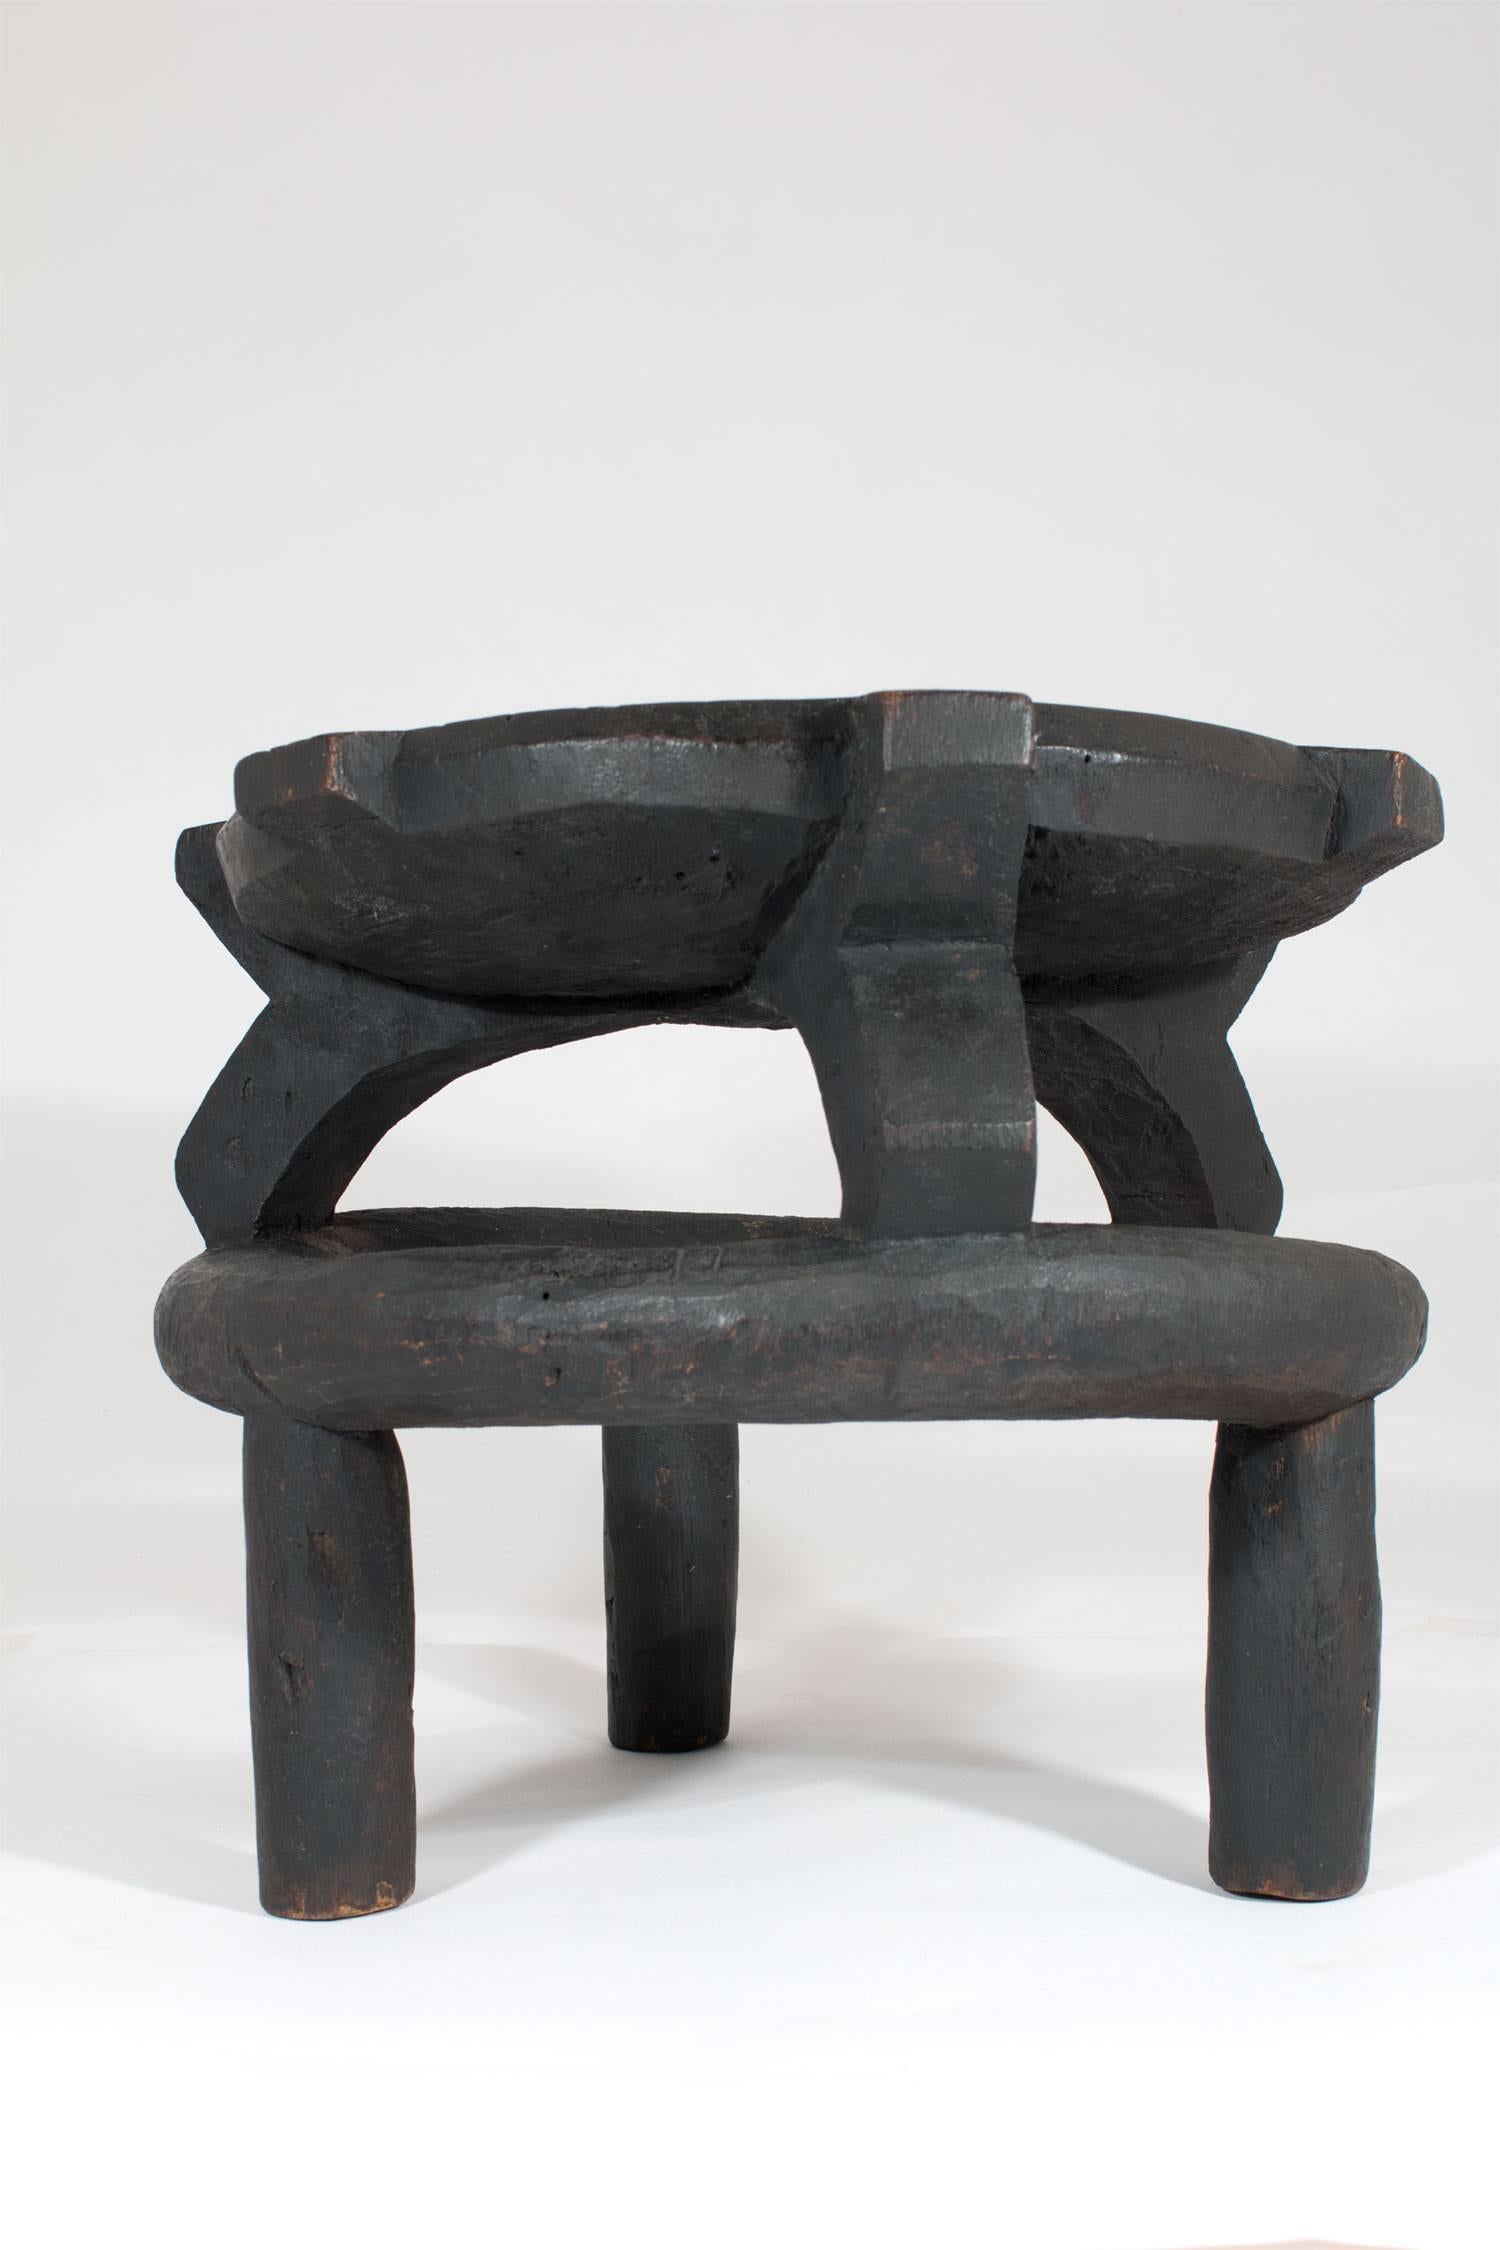 west african stool